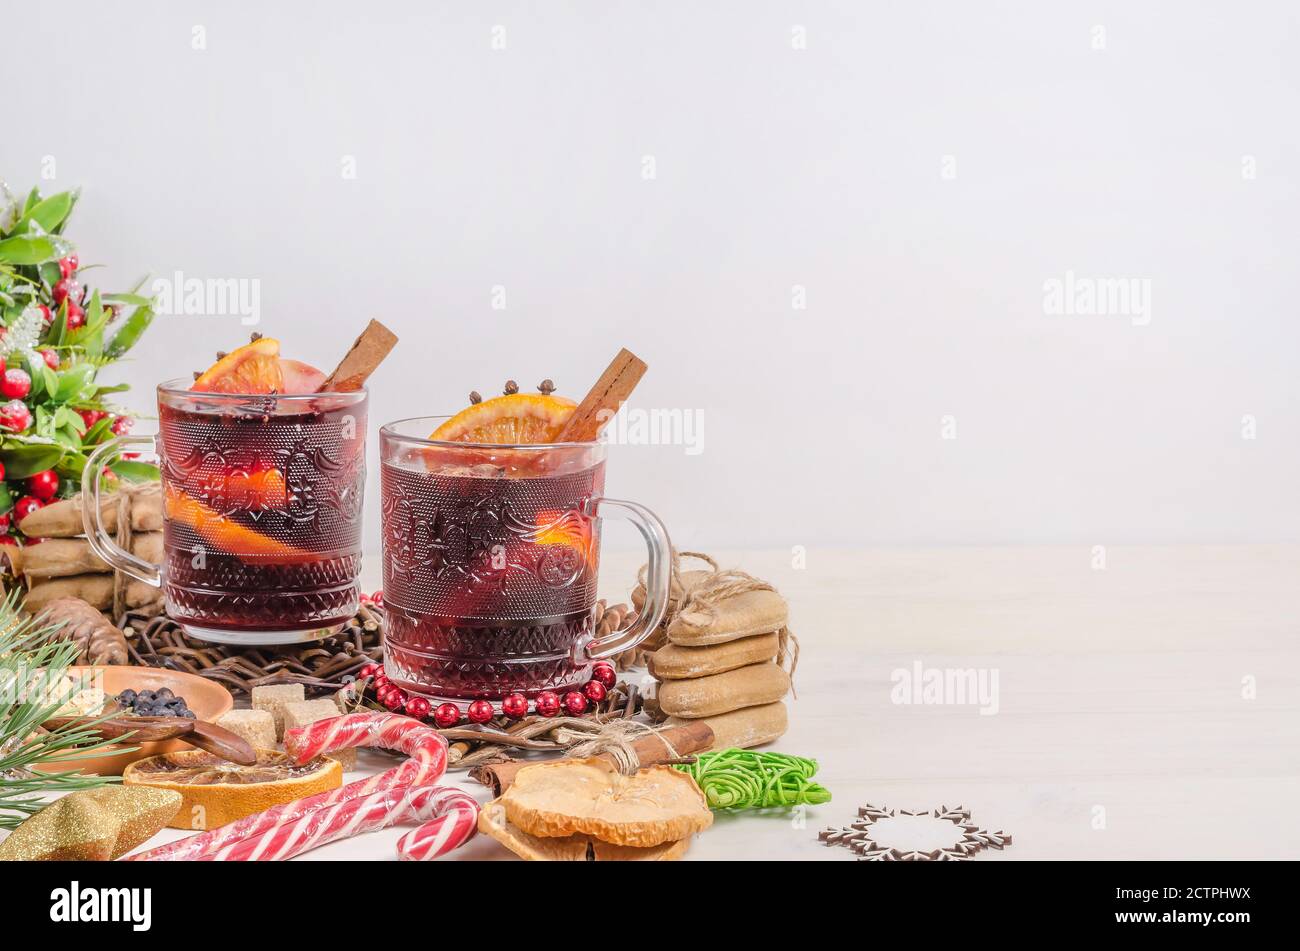 Mulled wine in mugs with Christmas decor on a white wooden background with copy space. Stock Photo